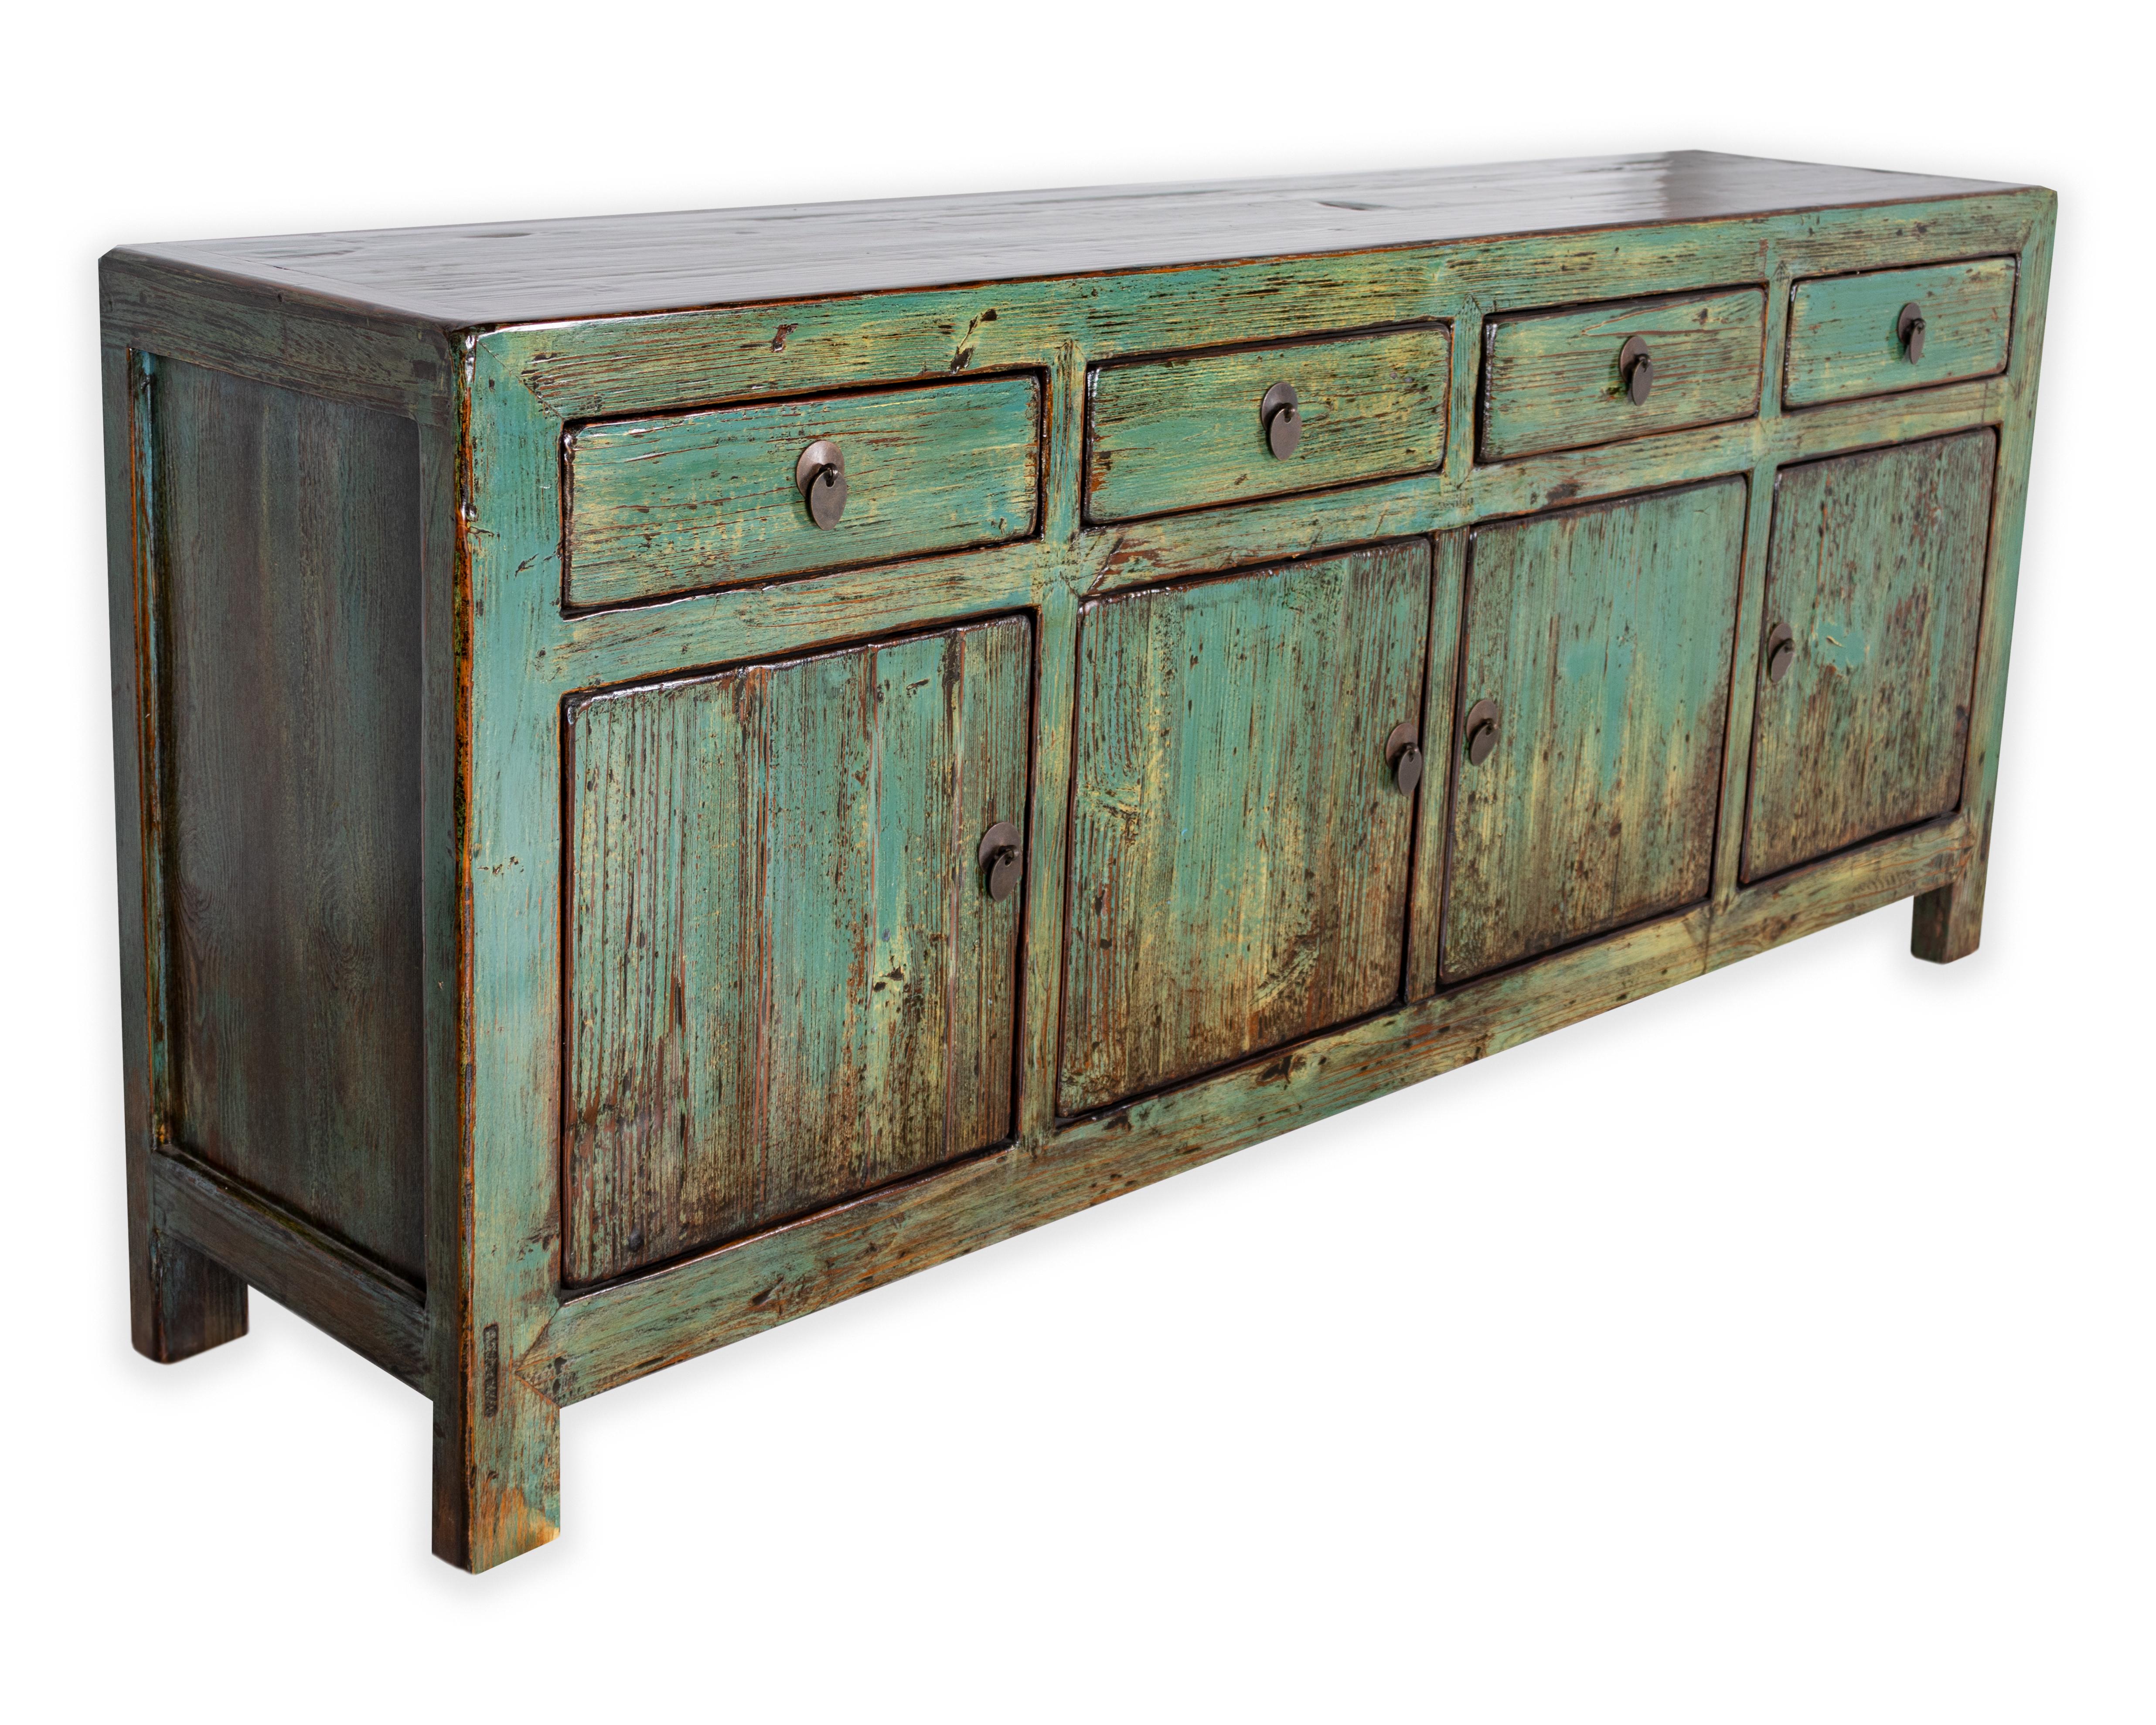 Four door server in original paint patina with lacquer overglaze. 

Part of our one of a kind Le Monde collection. Exclusive to Brendan Bass.